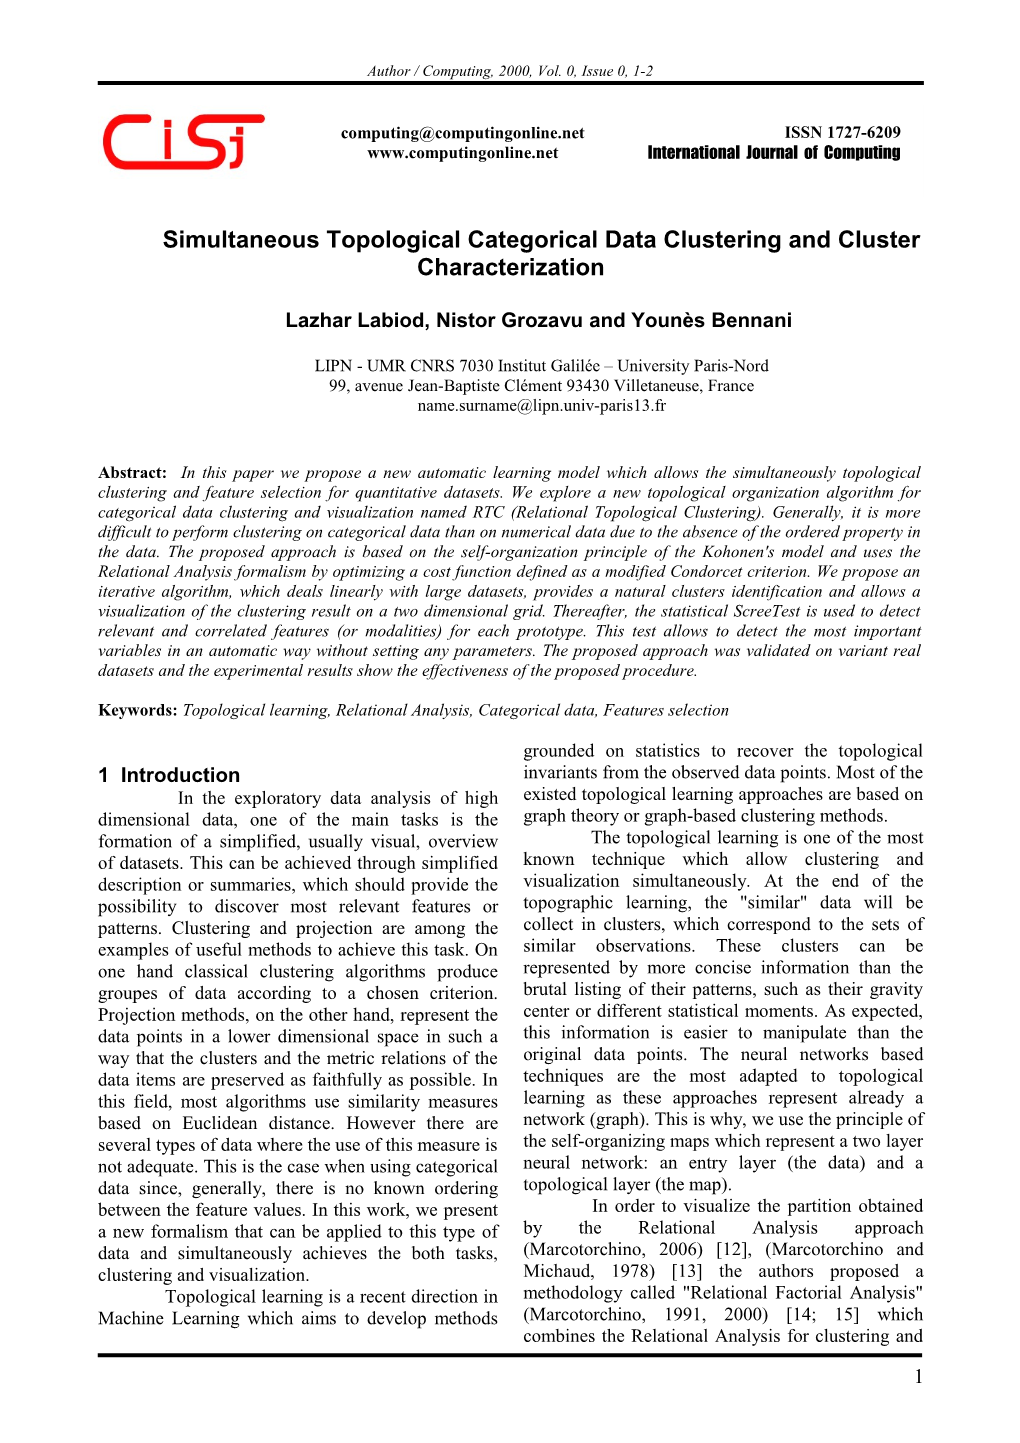 Simultaneous Topological Categorical Data Clustering and Cluster Characterization